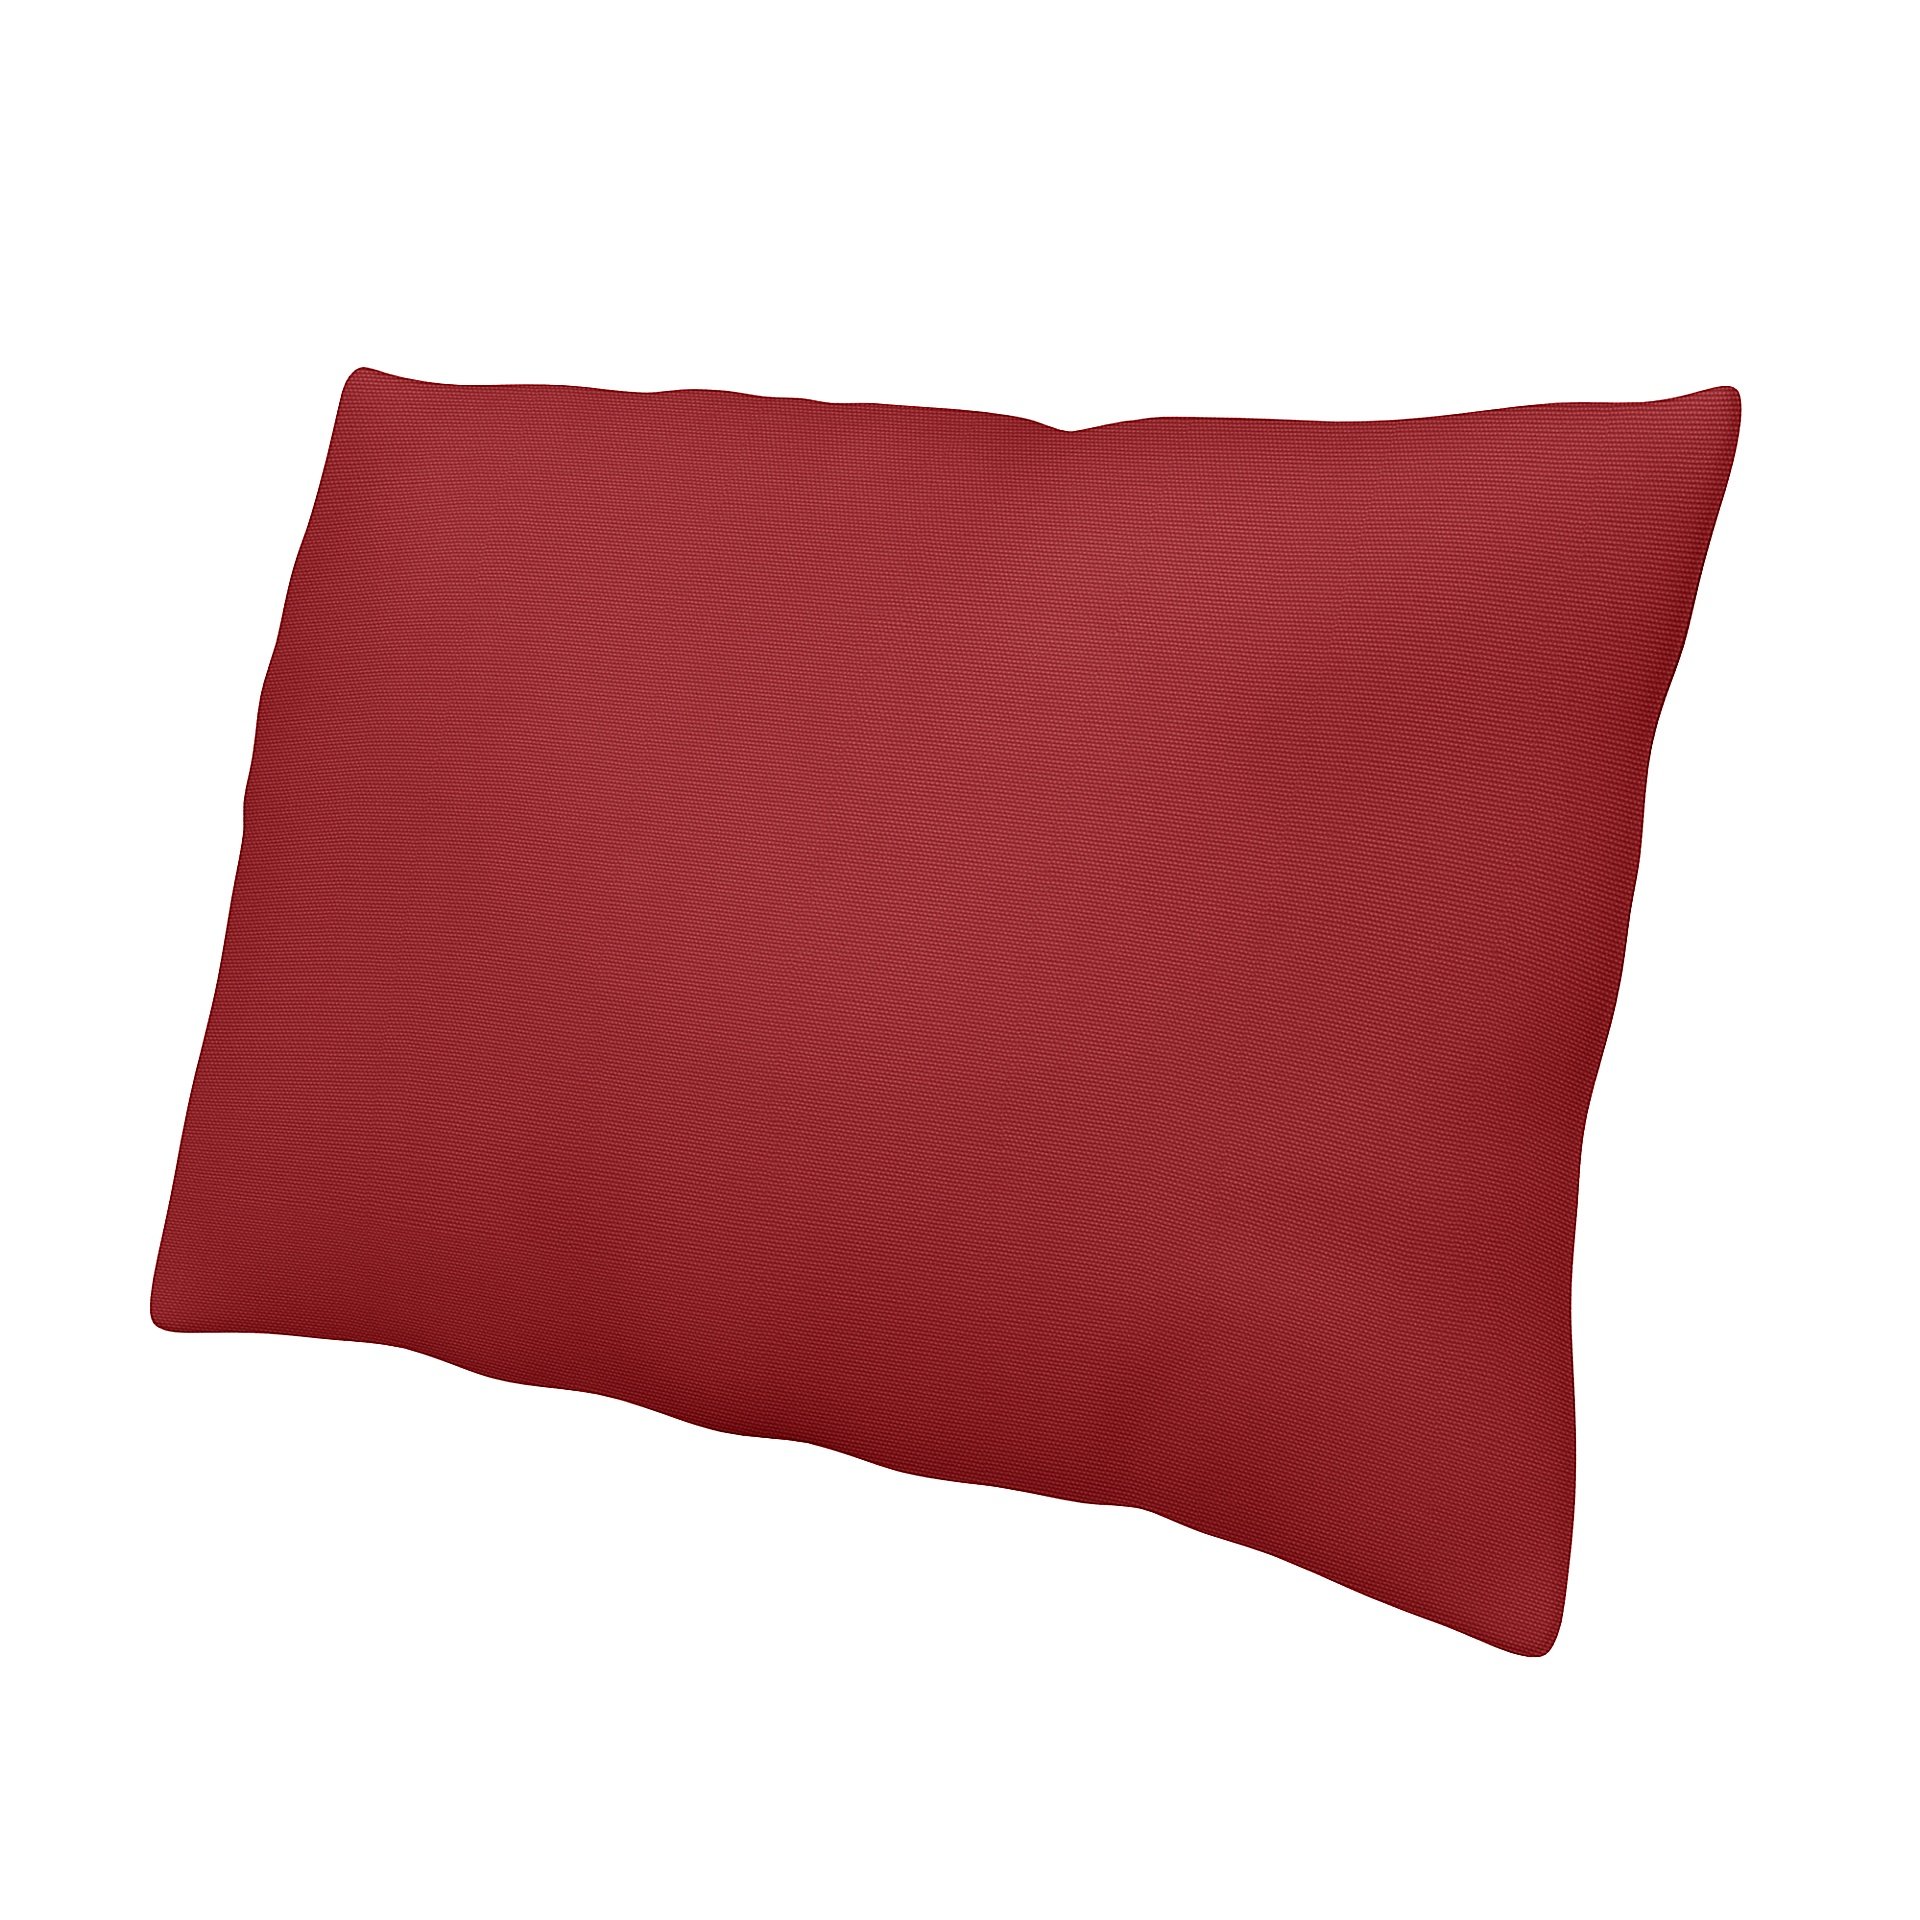 Cushion Cover, Scarlet Red, Cotton - Bemz